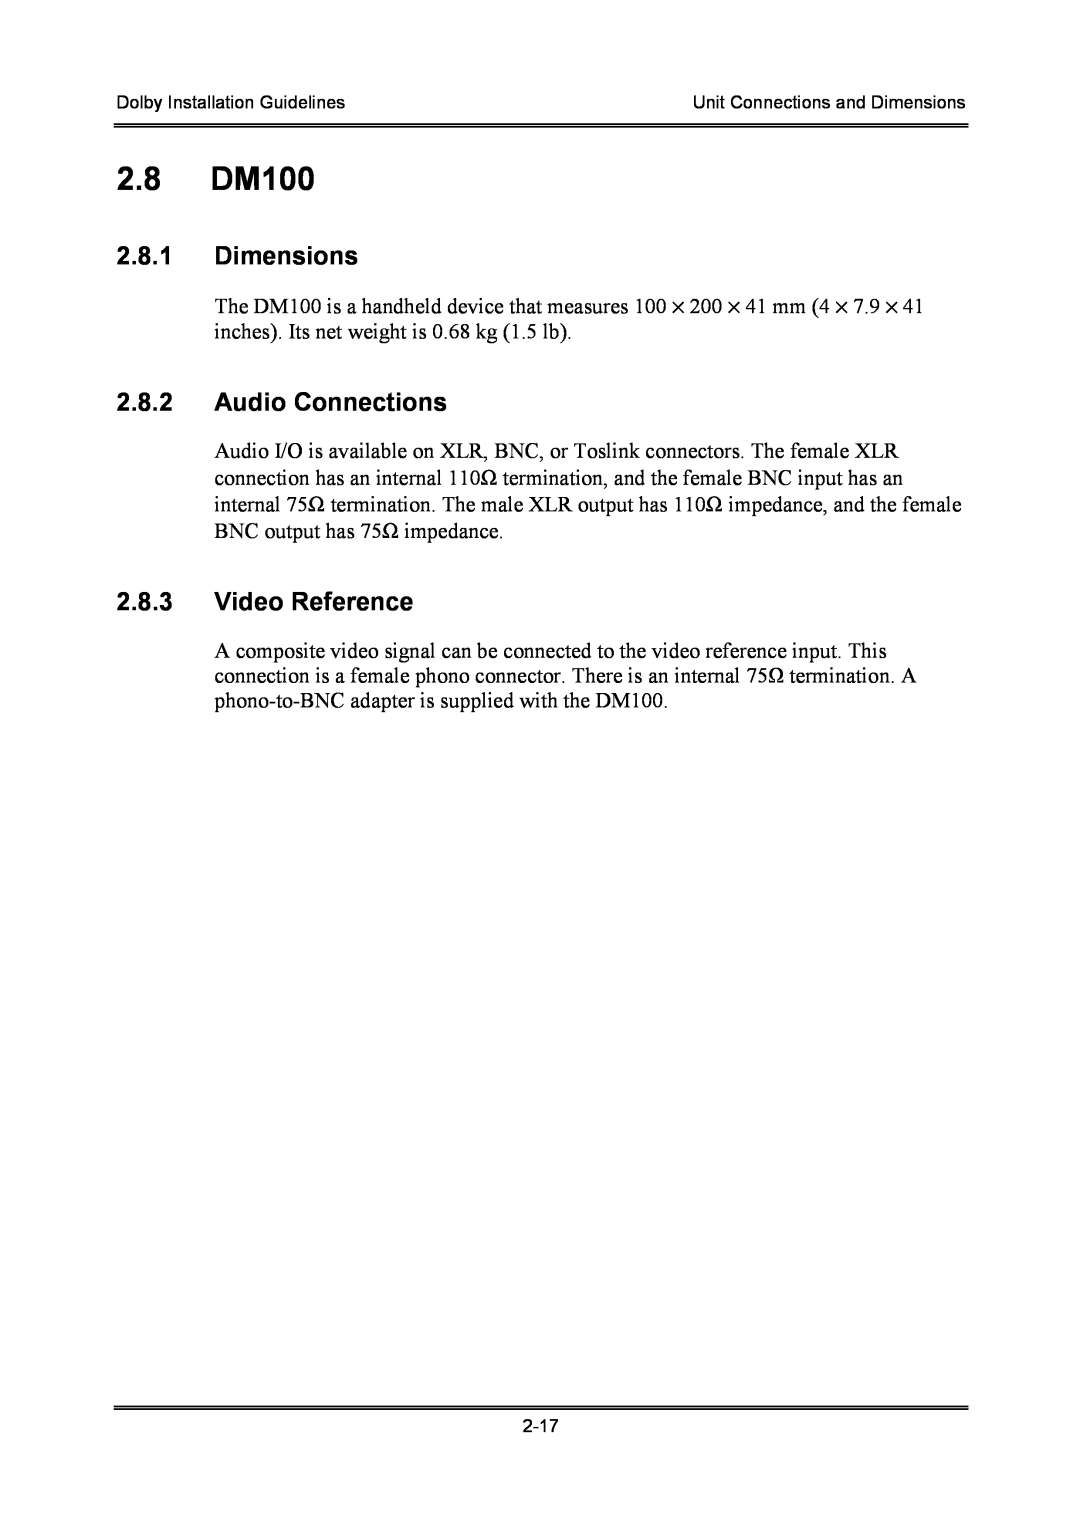 Dolby Laboratories S01/13621 manual 2.8DM100, 2.8.1Dimensions, 2.8.2Audio Connections, 2.8.3Video Reference 